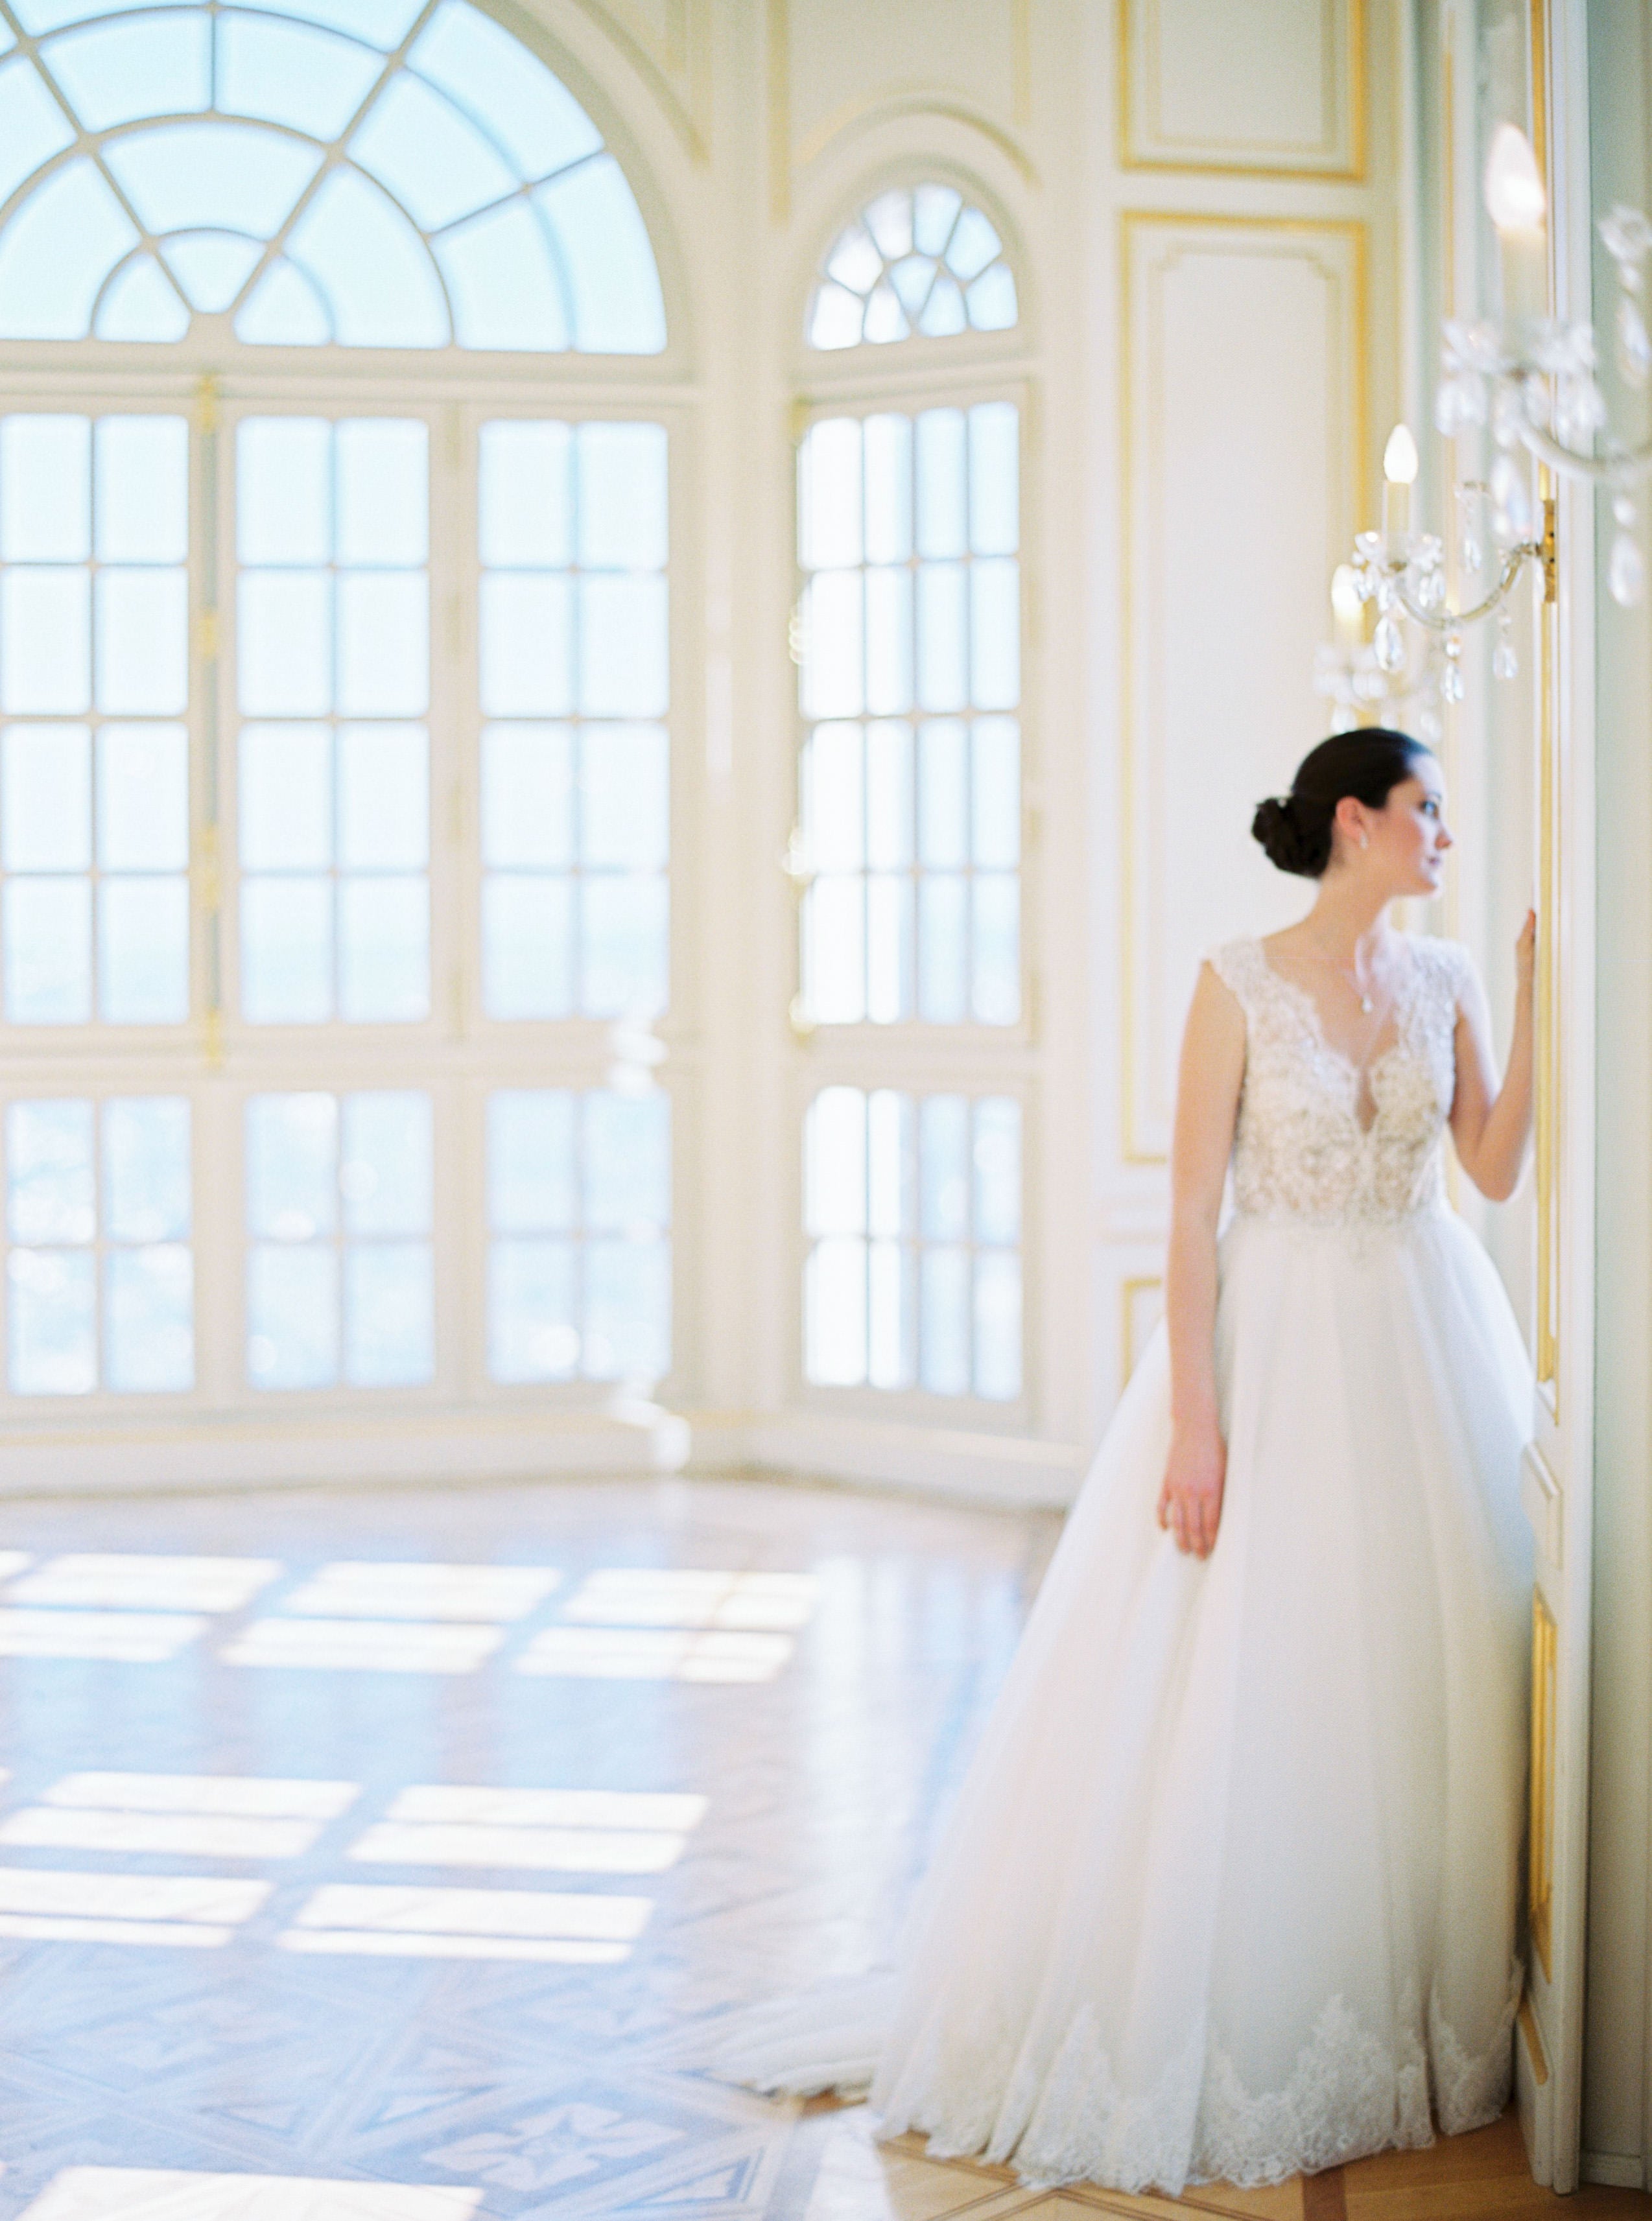 LUXURY CHATEAU WEDDING IN THE FRENCH RIVIERA